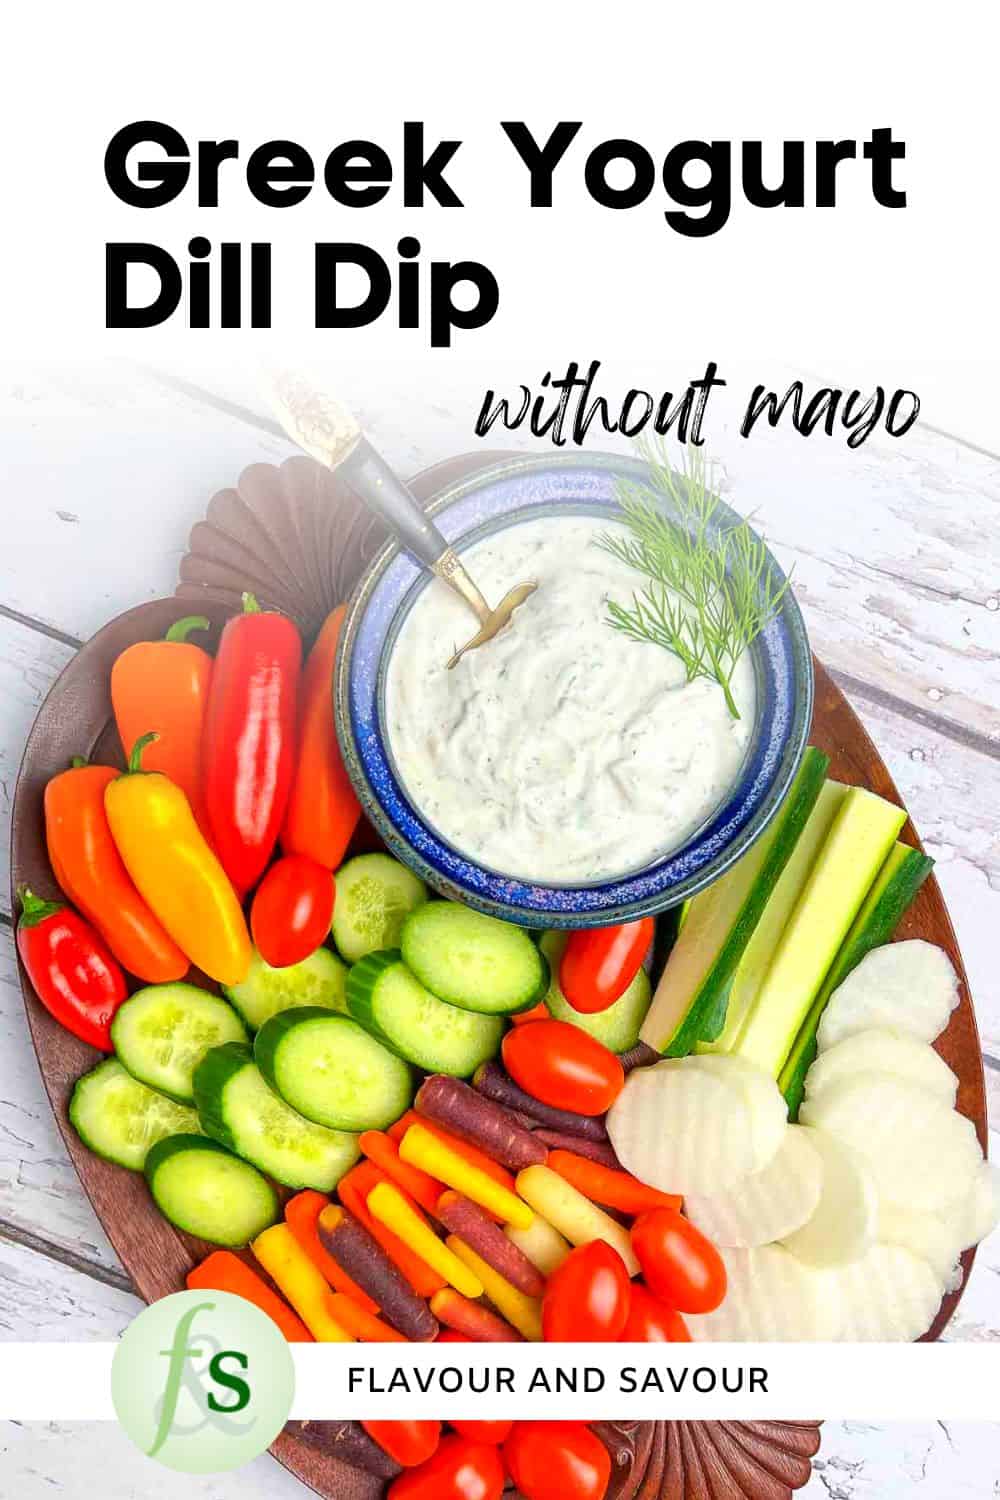 Image with text for Greek yogurt dill dip.